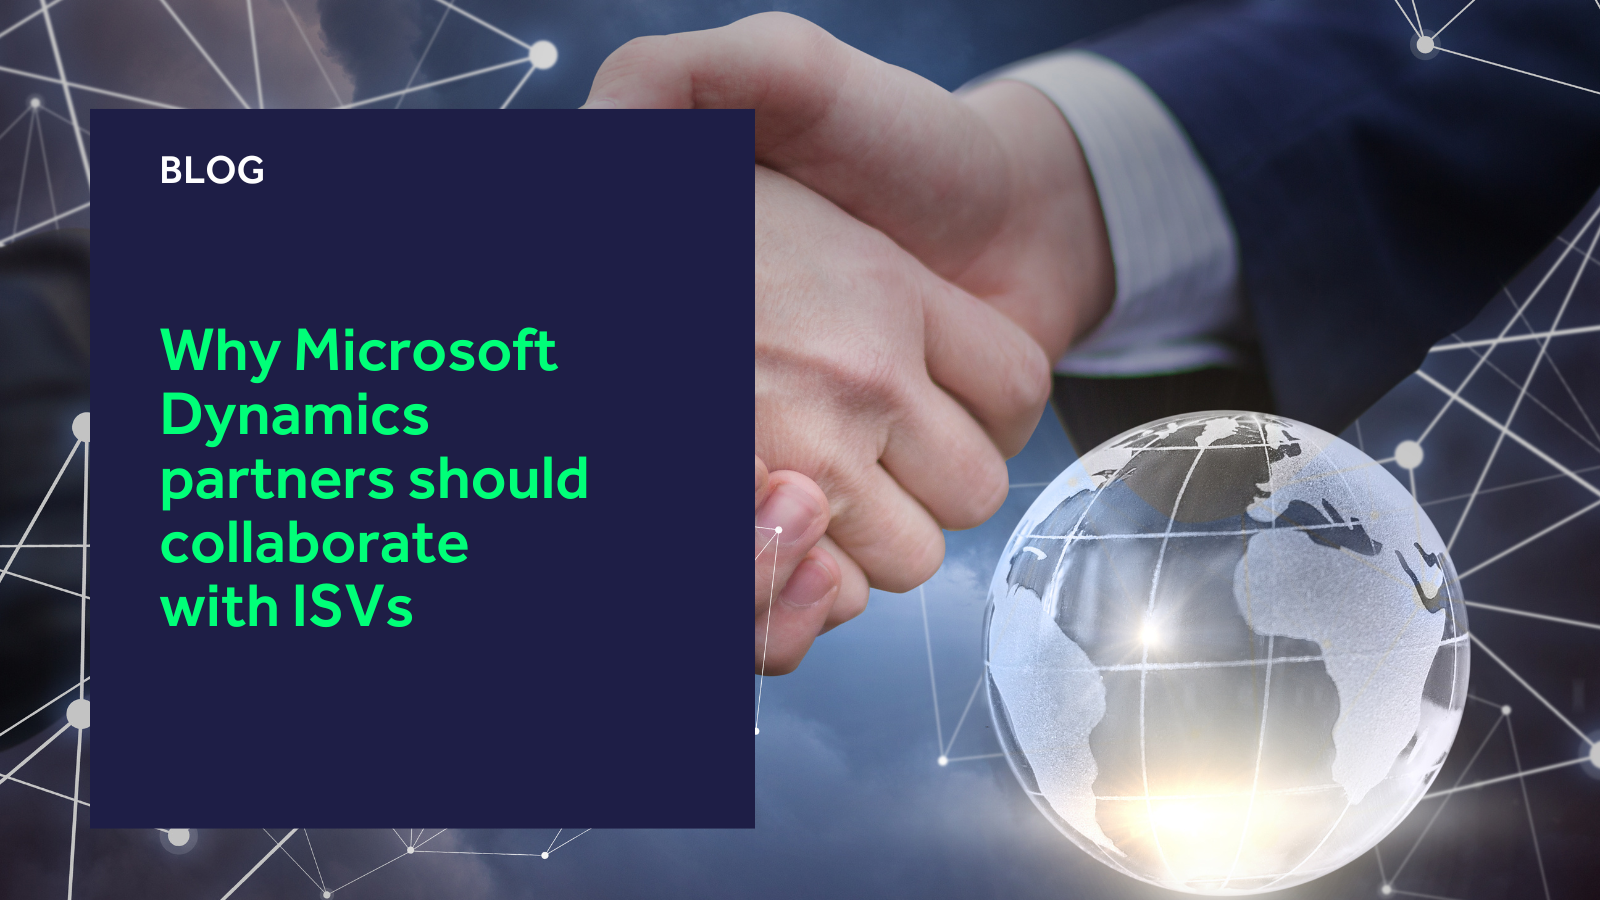 Why Microsoft Dynamics partners should collaborate with ISVs blog header